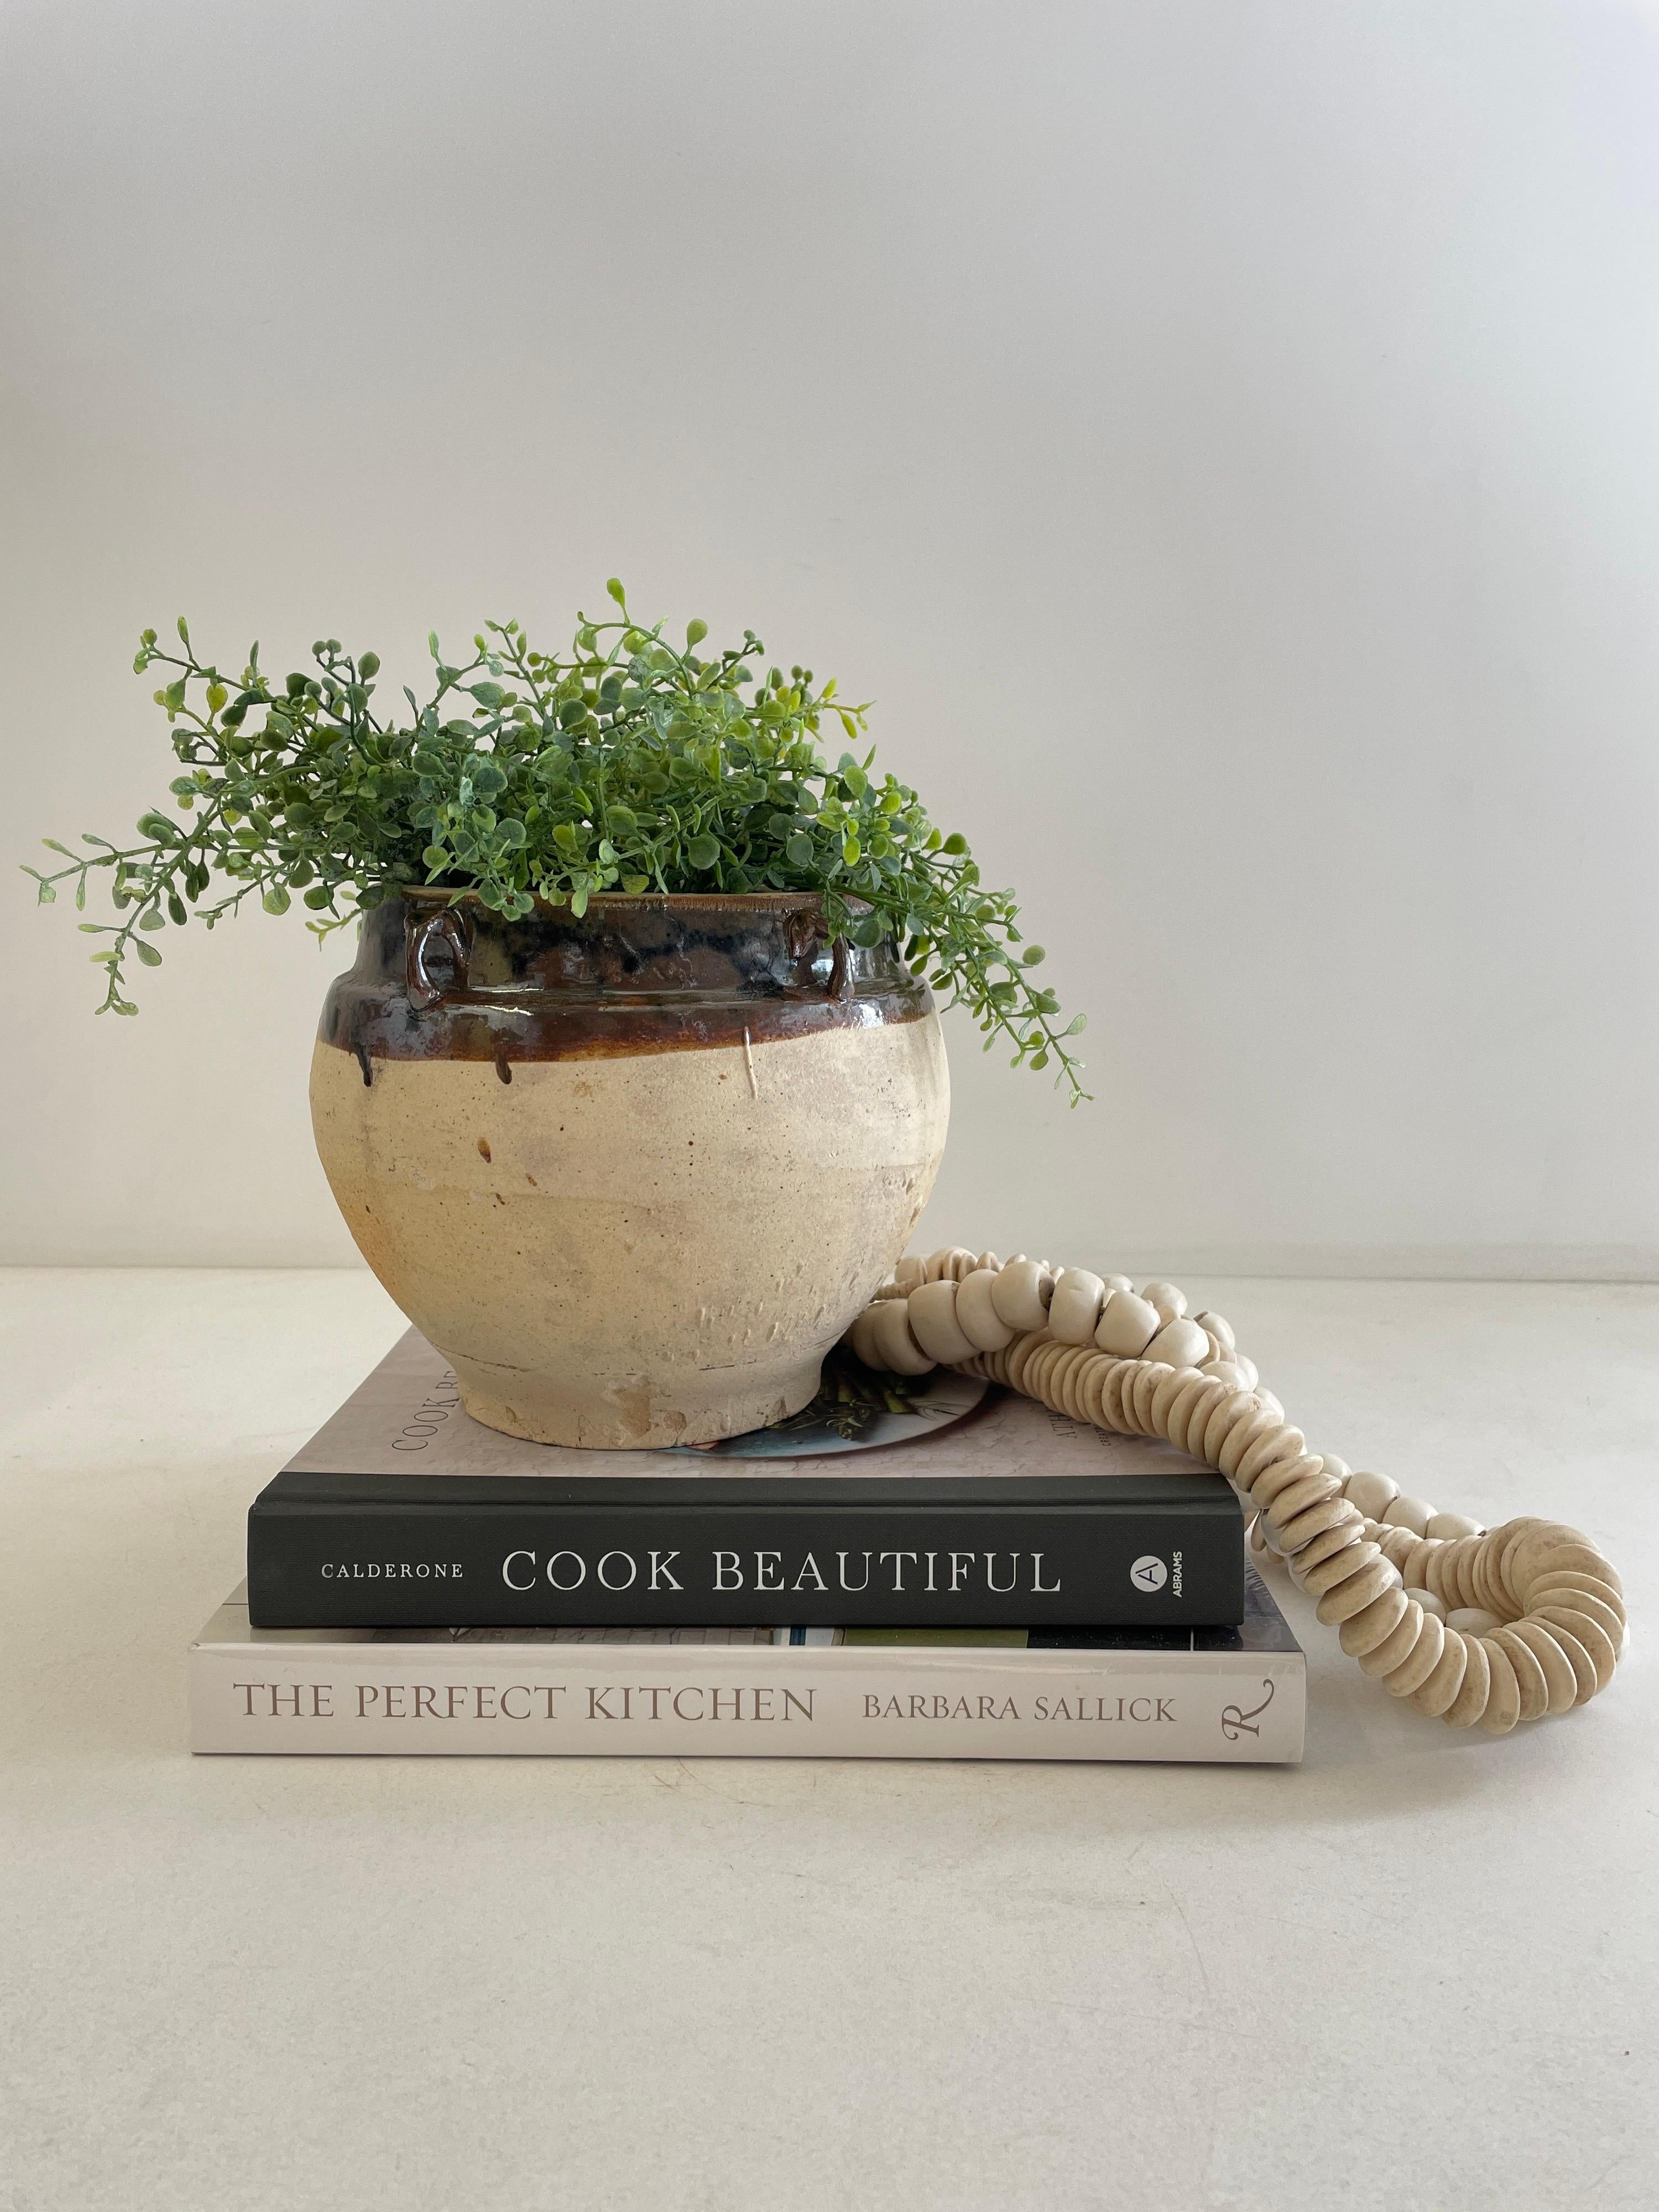 Vintage glazed pottery
Beautifully glazed and rich in character, this vintage glazed oil pot adds just the right amount of texture + warmth where you need it. Stunning glazed finish with warm terra-cotta accents.
Coloring is an olive green, dark